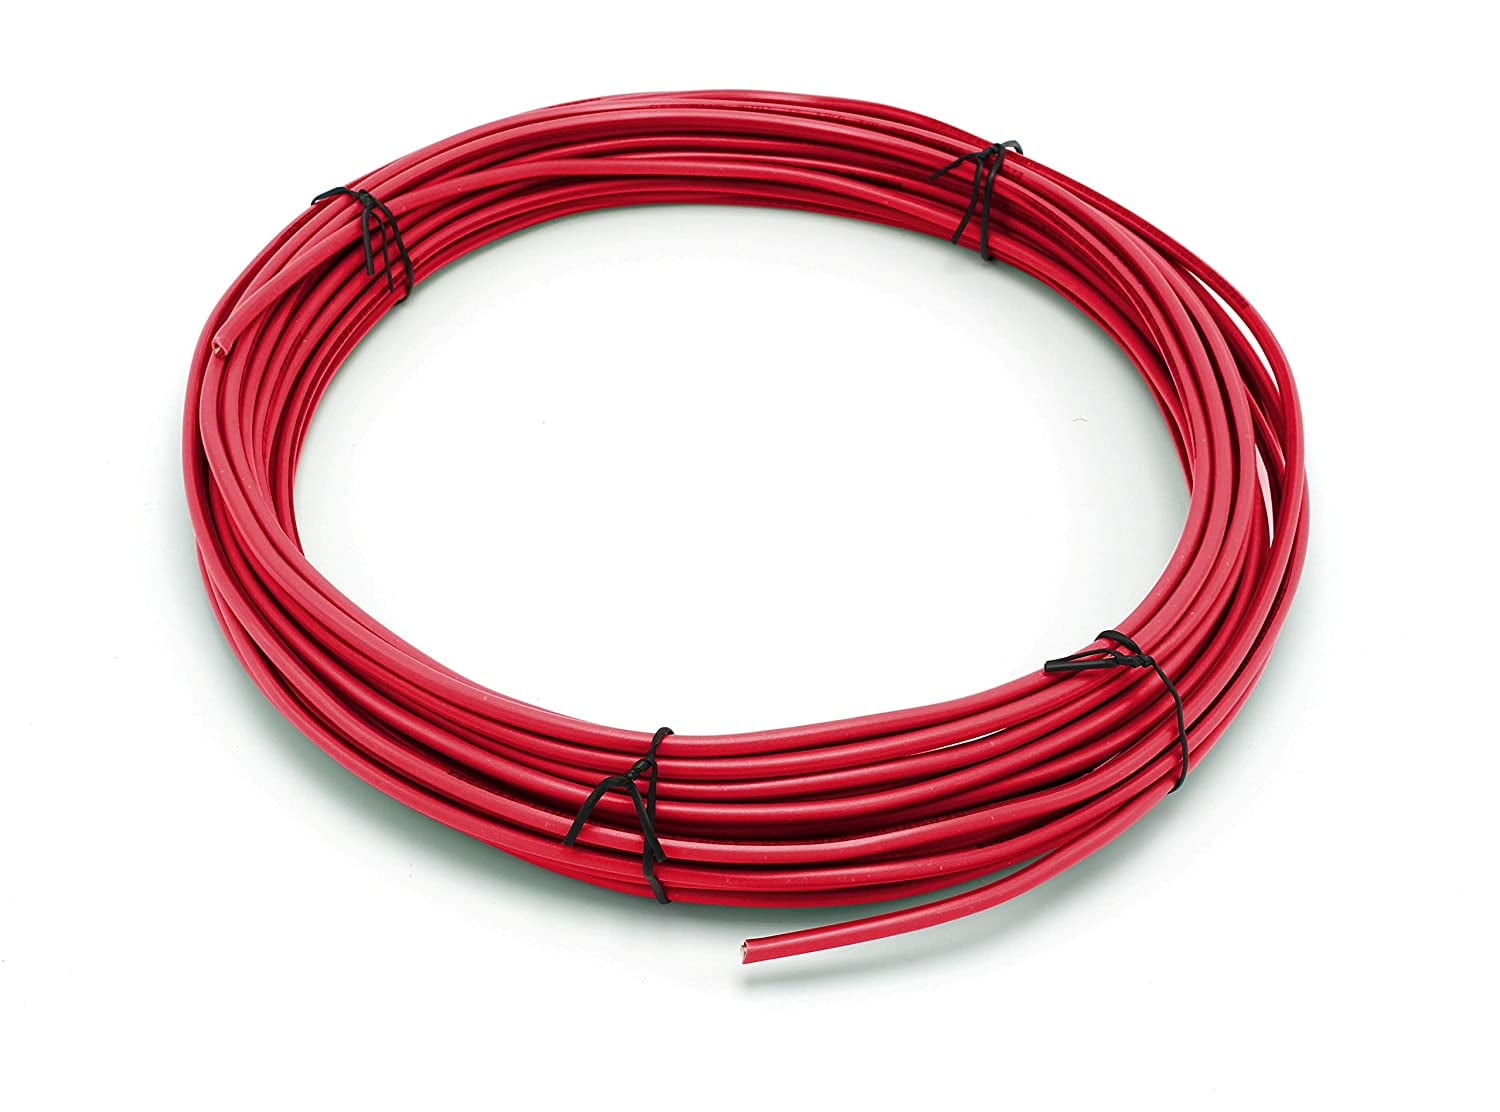 18 Awg Solid Wire